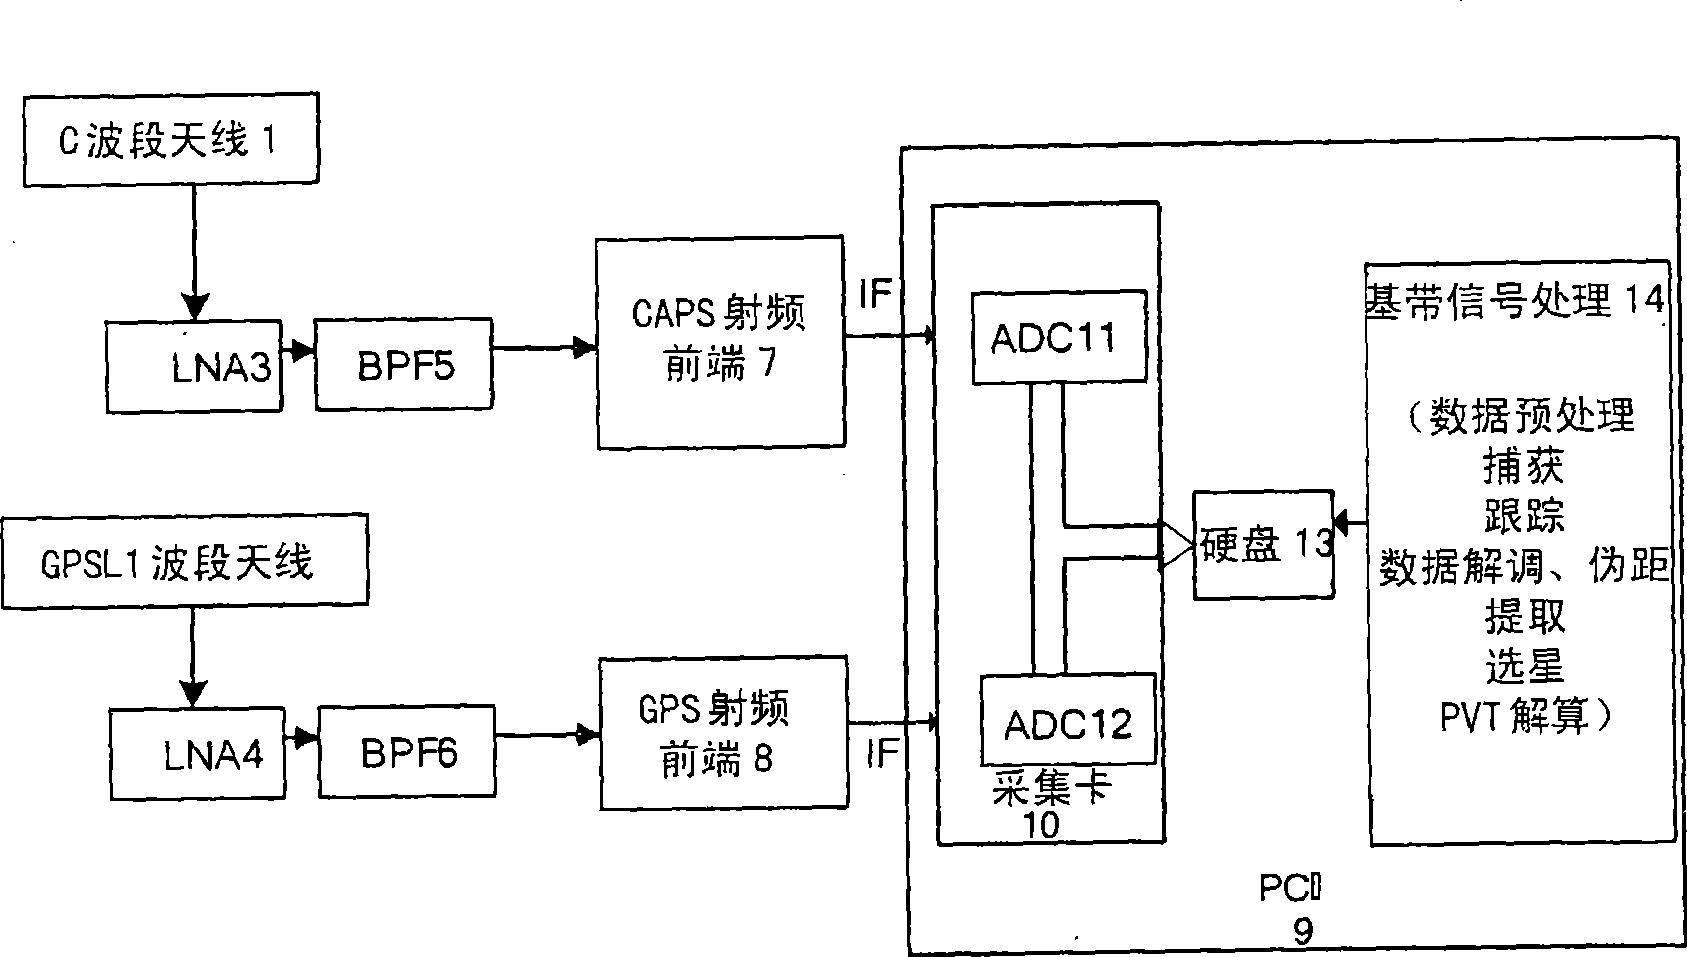 GPS/CAPS dual mode software receiver based on PC machine